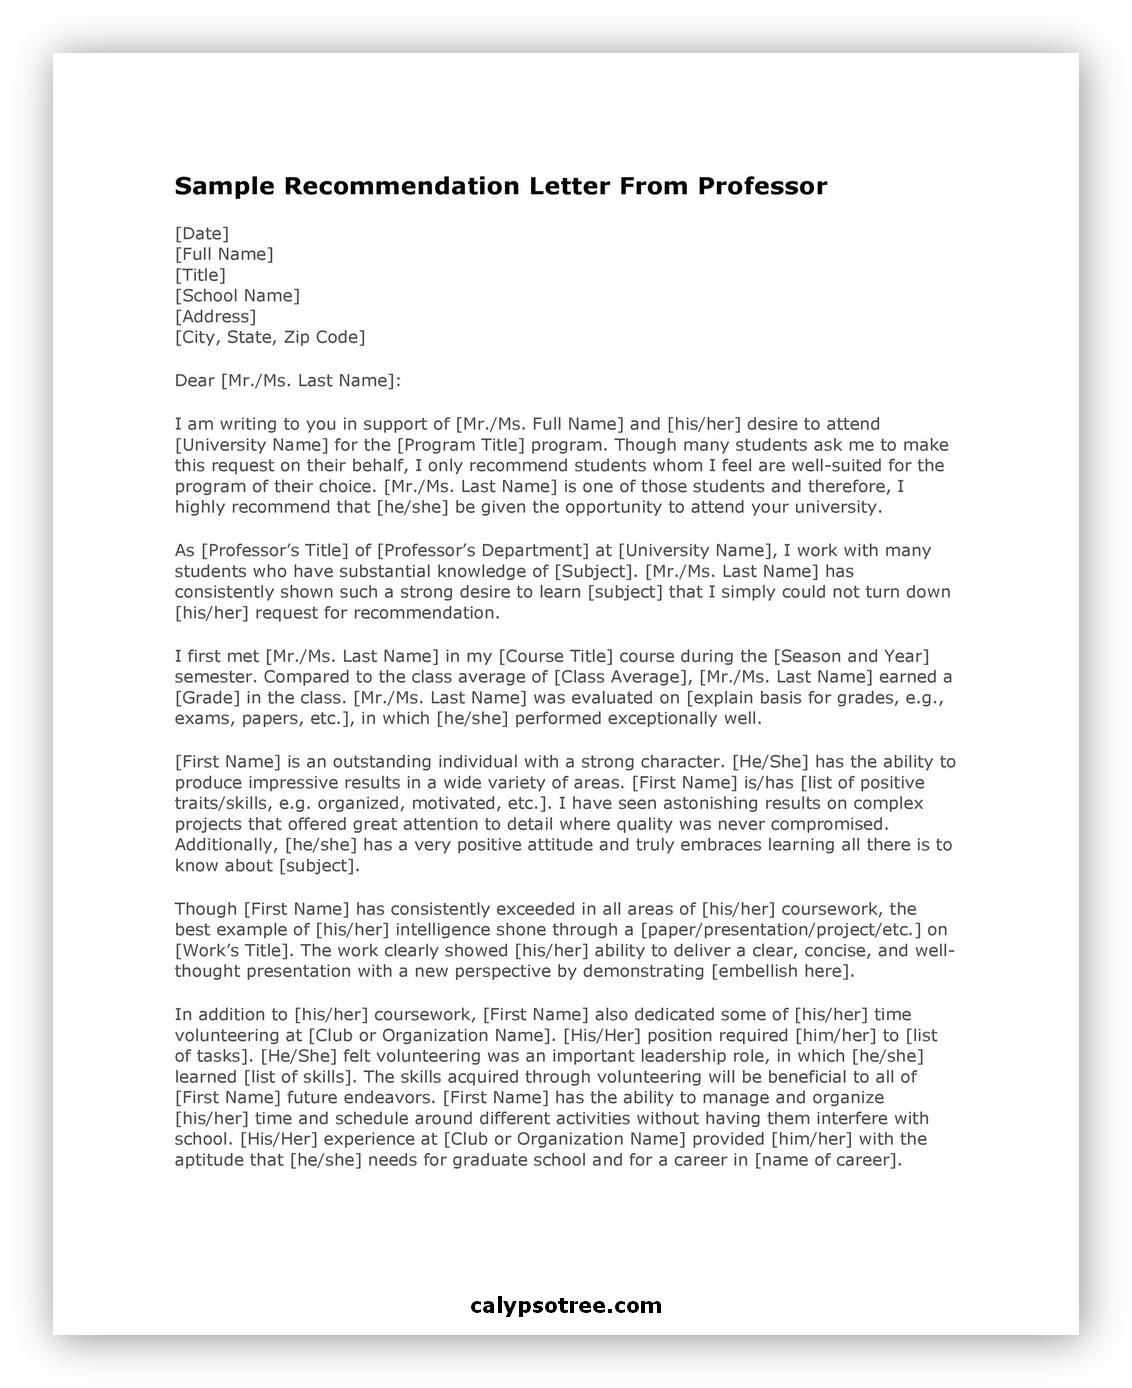 Letter of Recommendation Sample 07